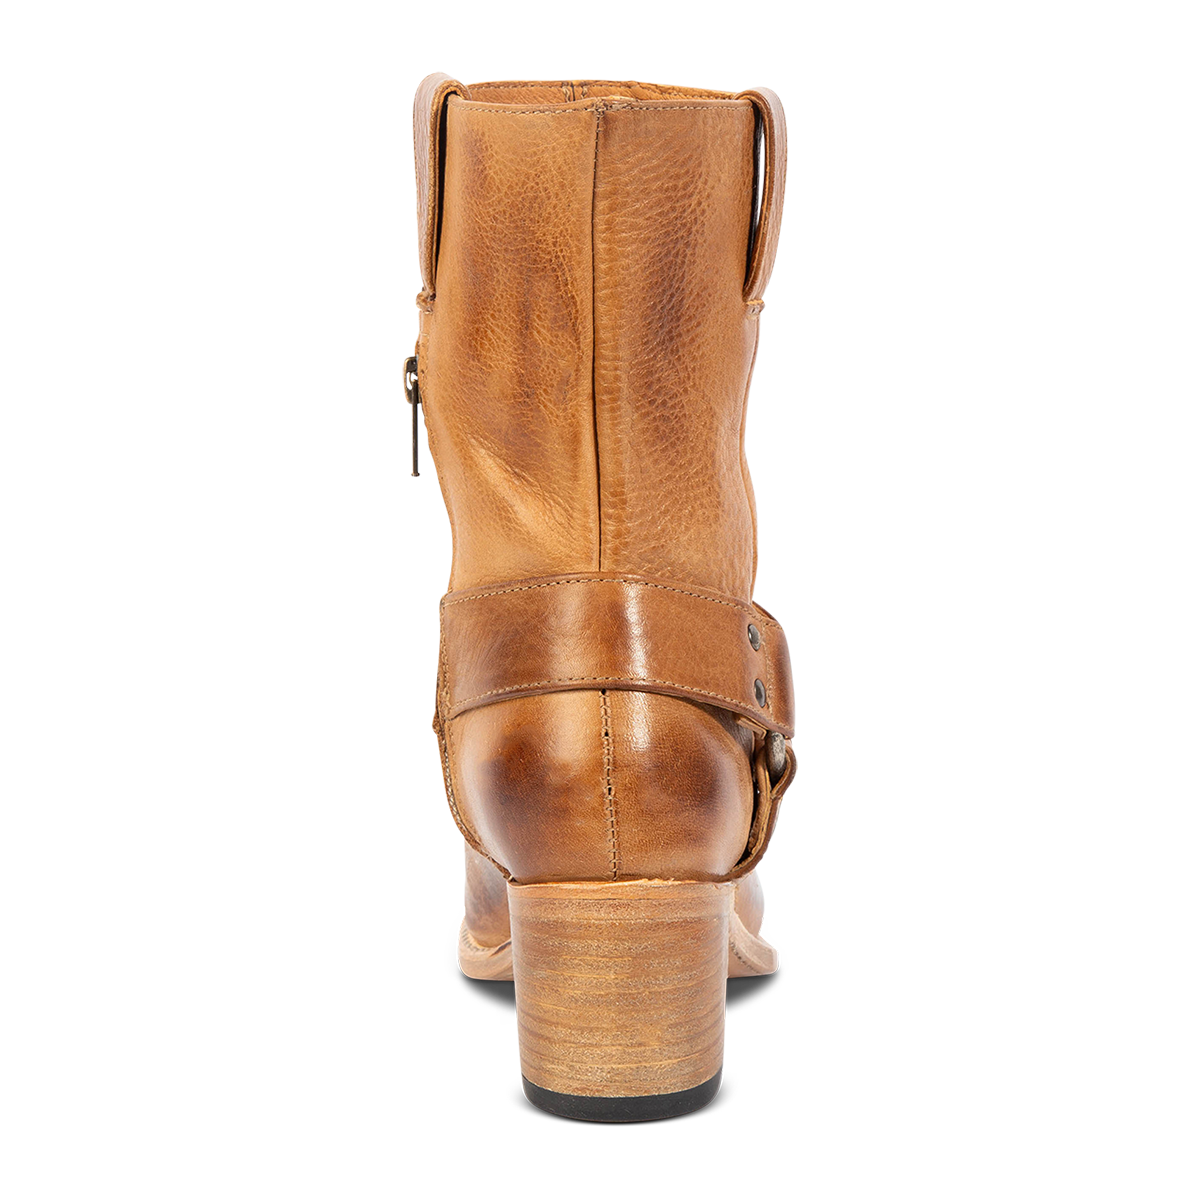 Back view showing FREEBIRD women's Darcy wheat boot with leather pull straps, inside zip closure, and square toe